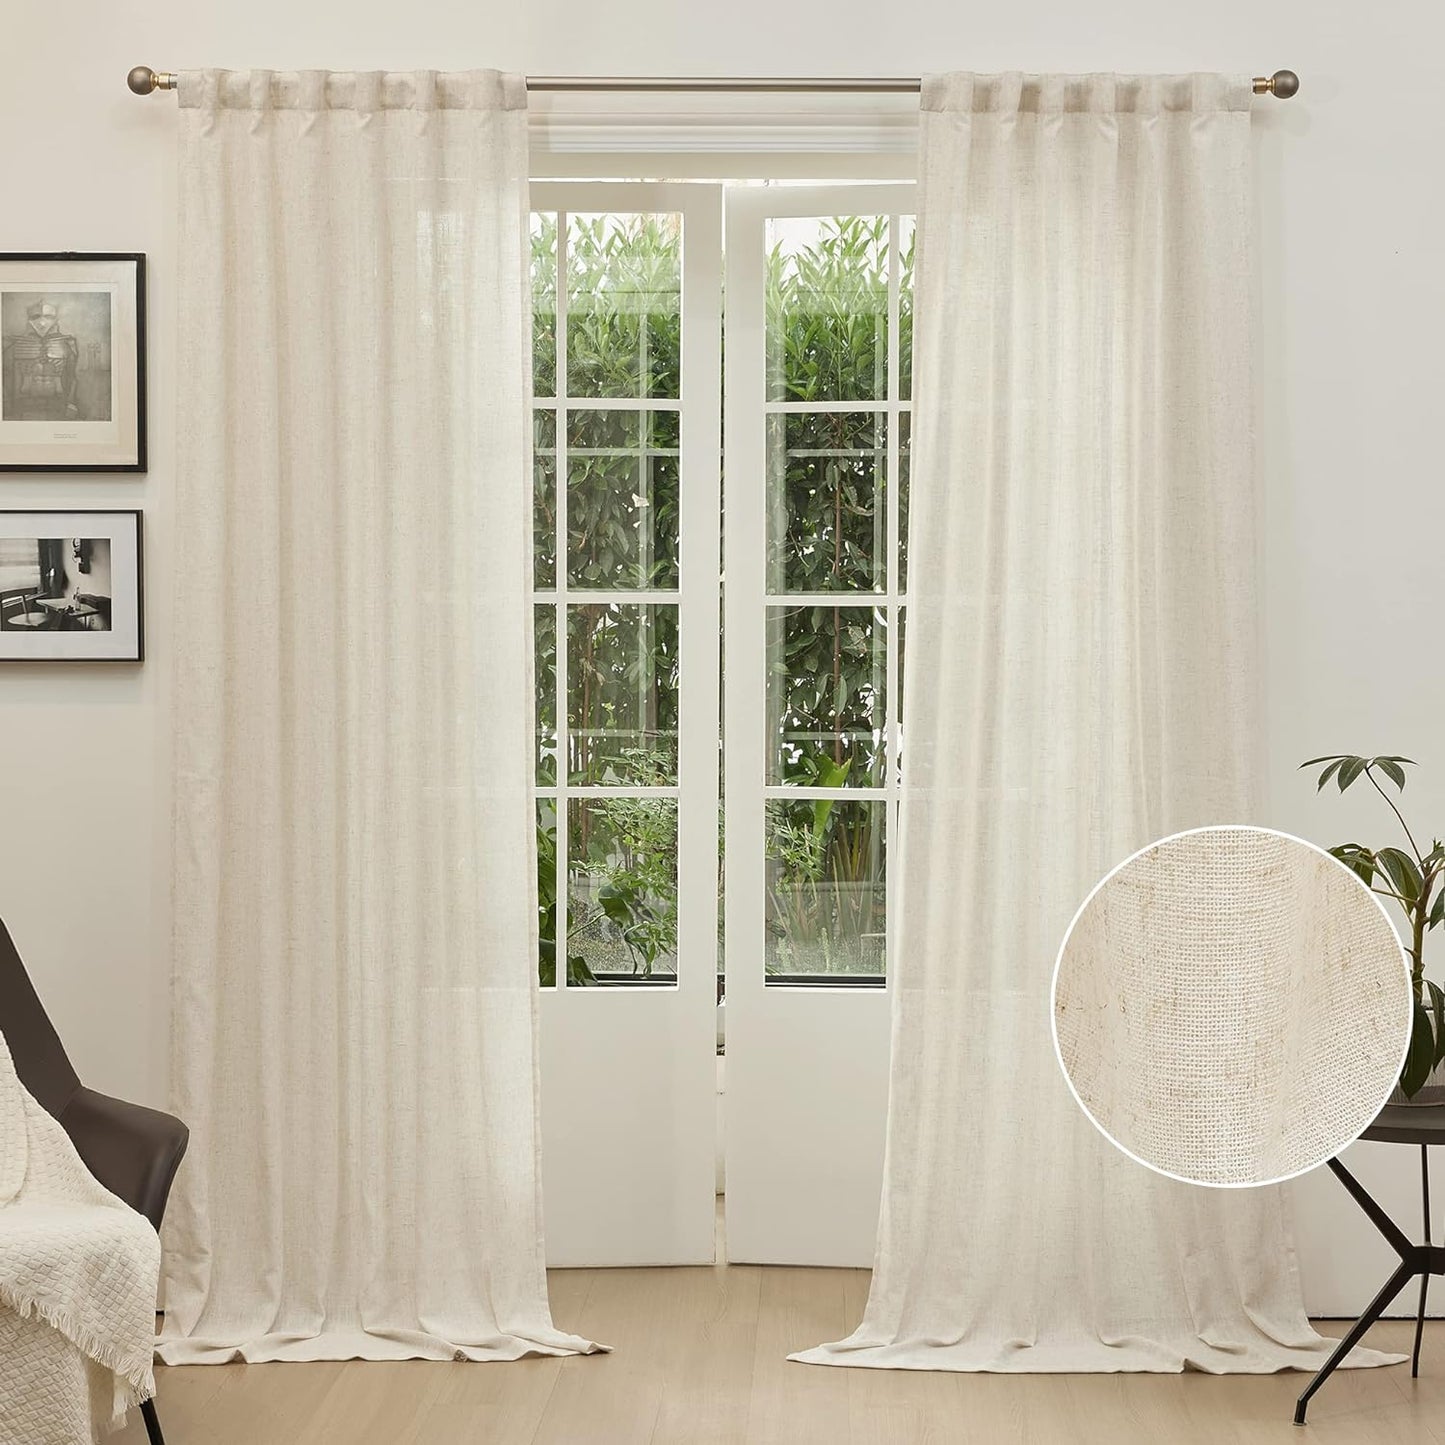 MYSKY HOME 90 Inch Curtains for Sliding Glass Door Windows, Living Room Decoration Cotton Drapes Soft Comfortable Touch Farmhouse Country Patio Treatment Set, 50" Width, Natural, 2 Panels  MYSKYTEX Linen 50"W X 108"L 